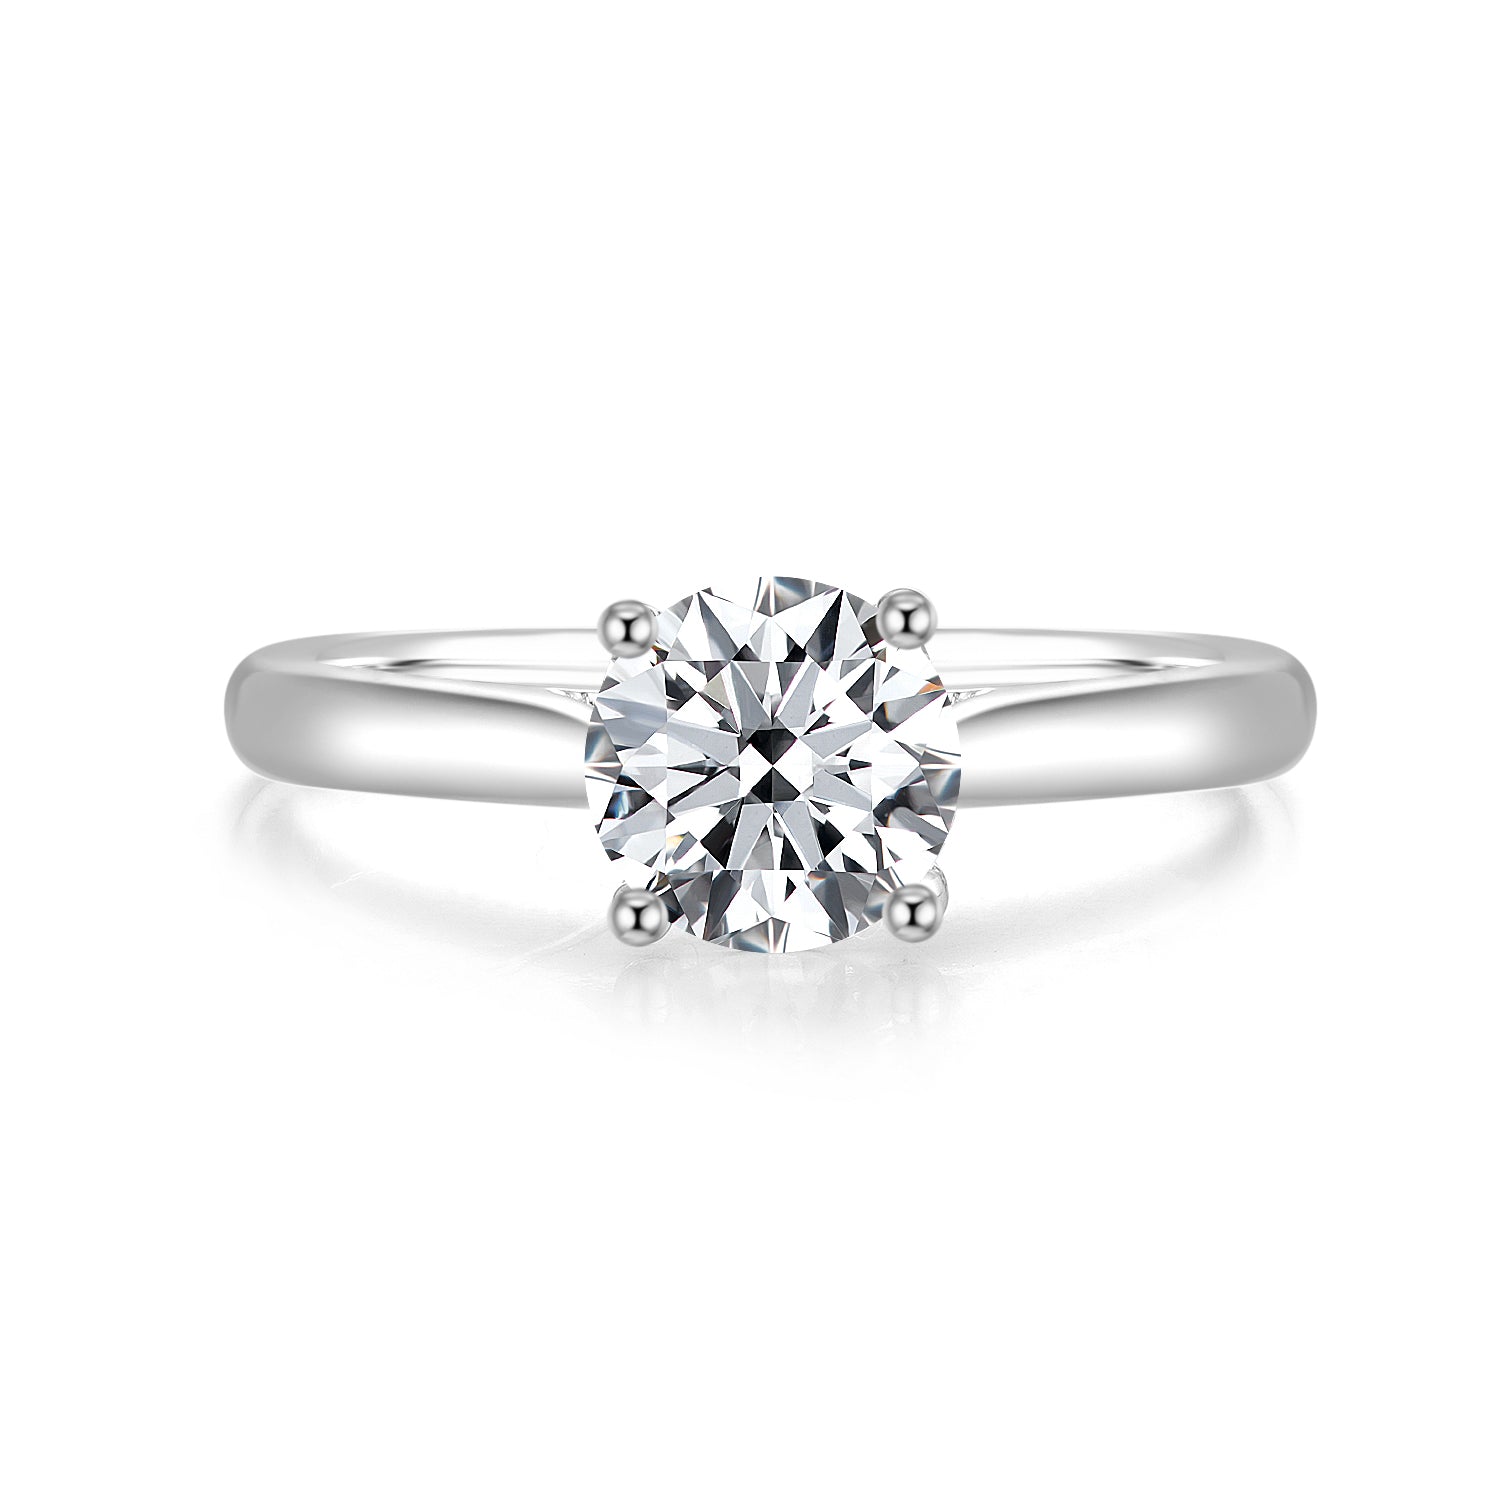 Celine | 1ct Solitaire Engagement Ring